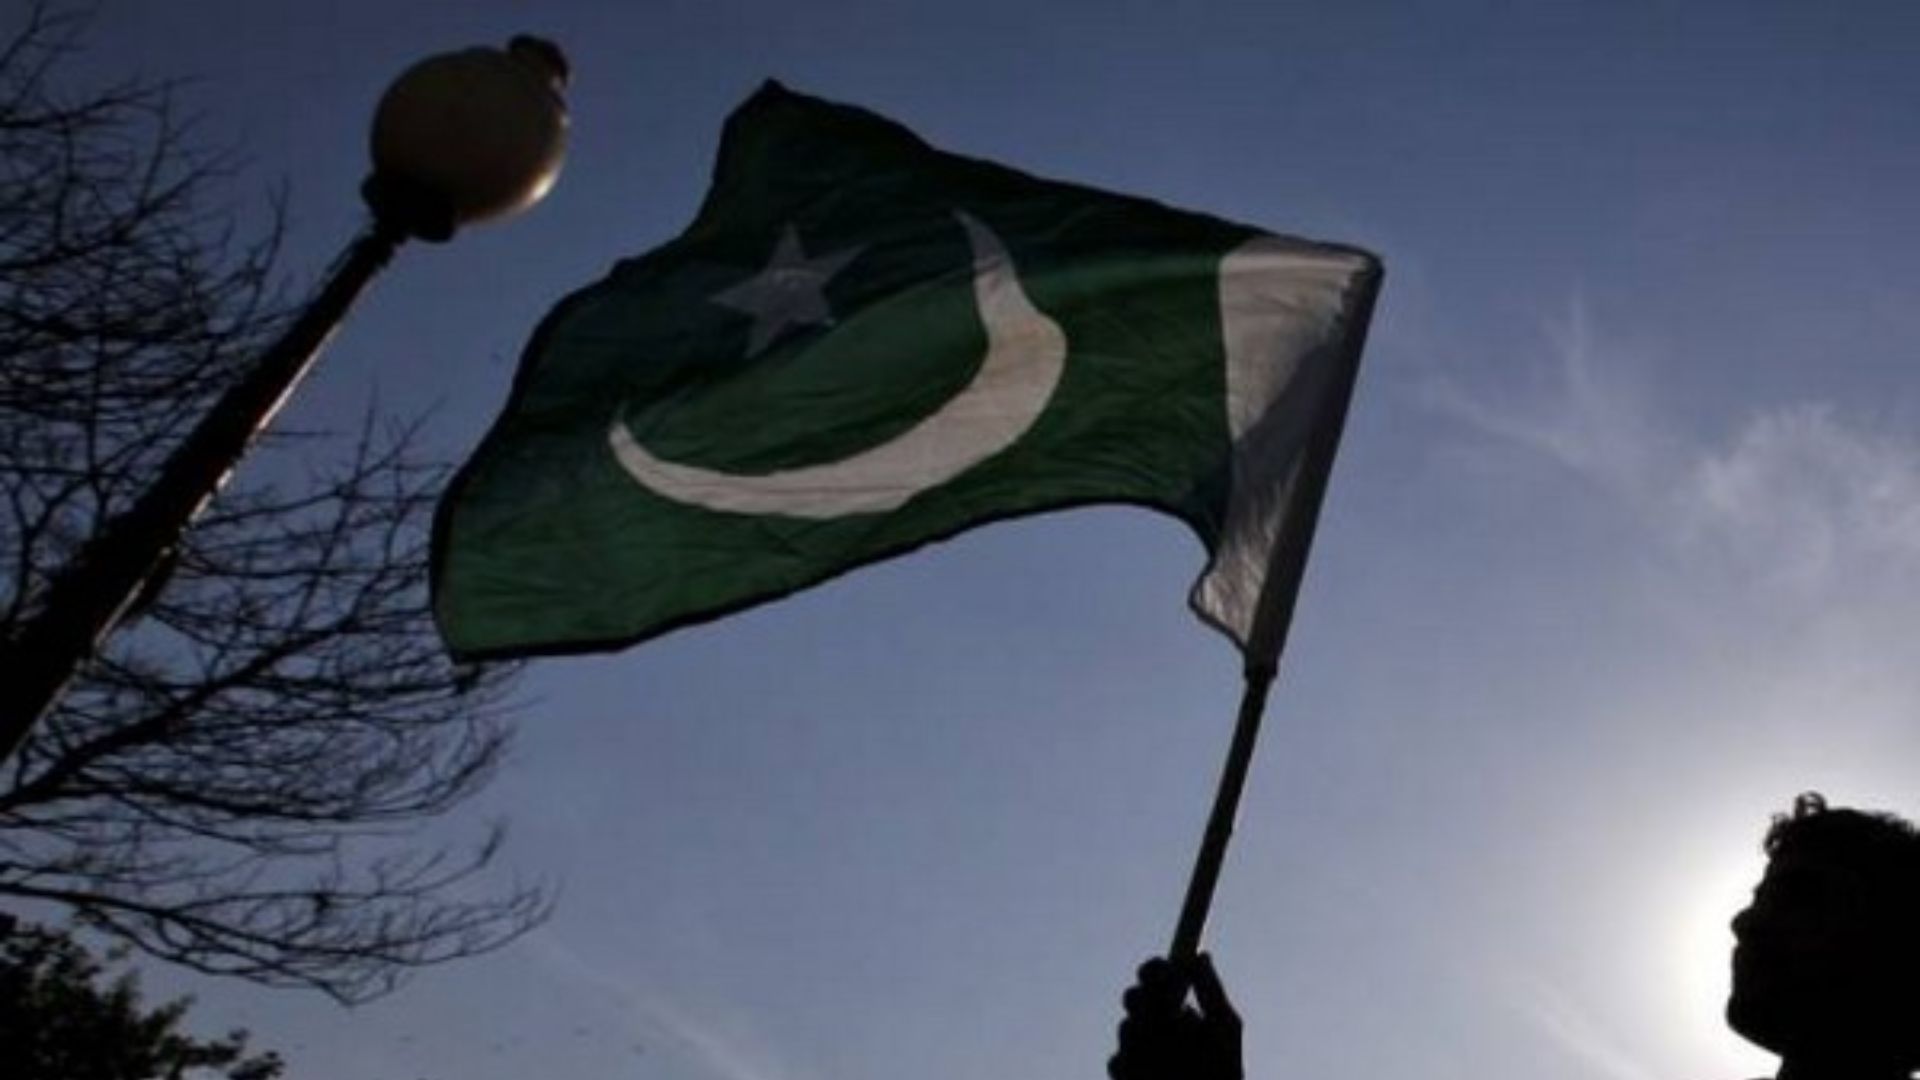 Pakistan: Islamabad implements ‘Section 144’ amidst election disputes